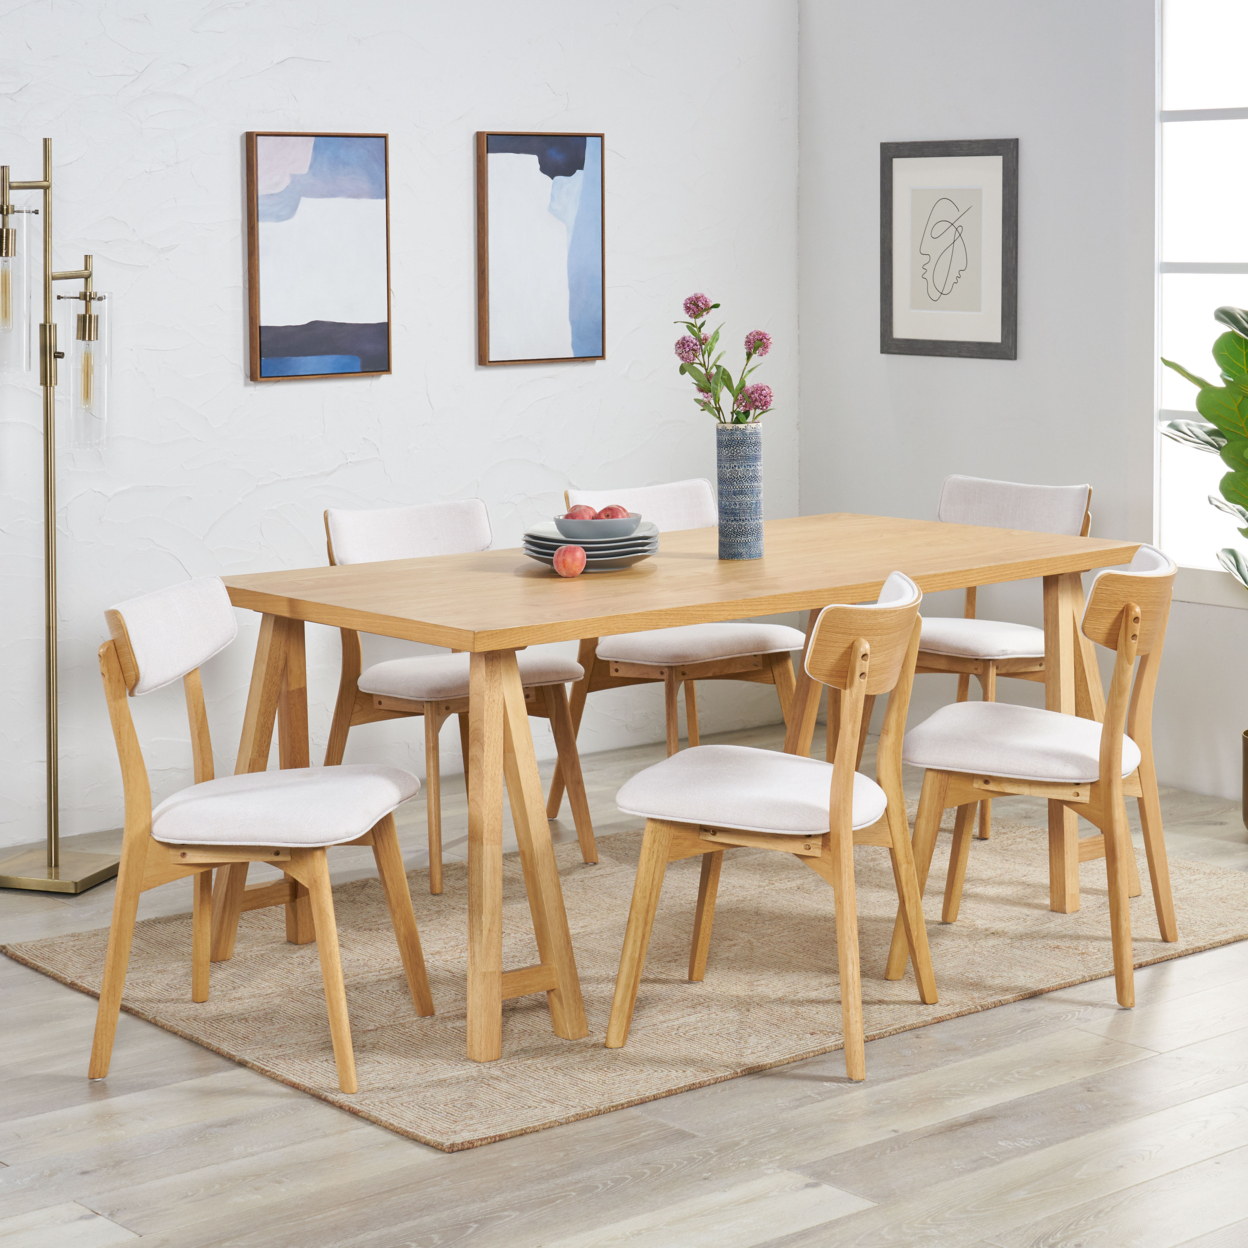 Turat Mid-Century Modern 7 Piece Dining Set With A-Frame Table - Natural Walnut/walnut/light Beige